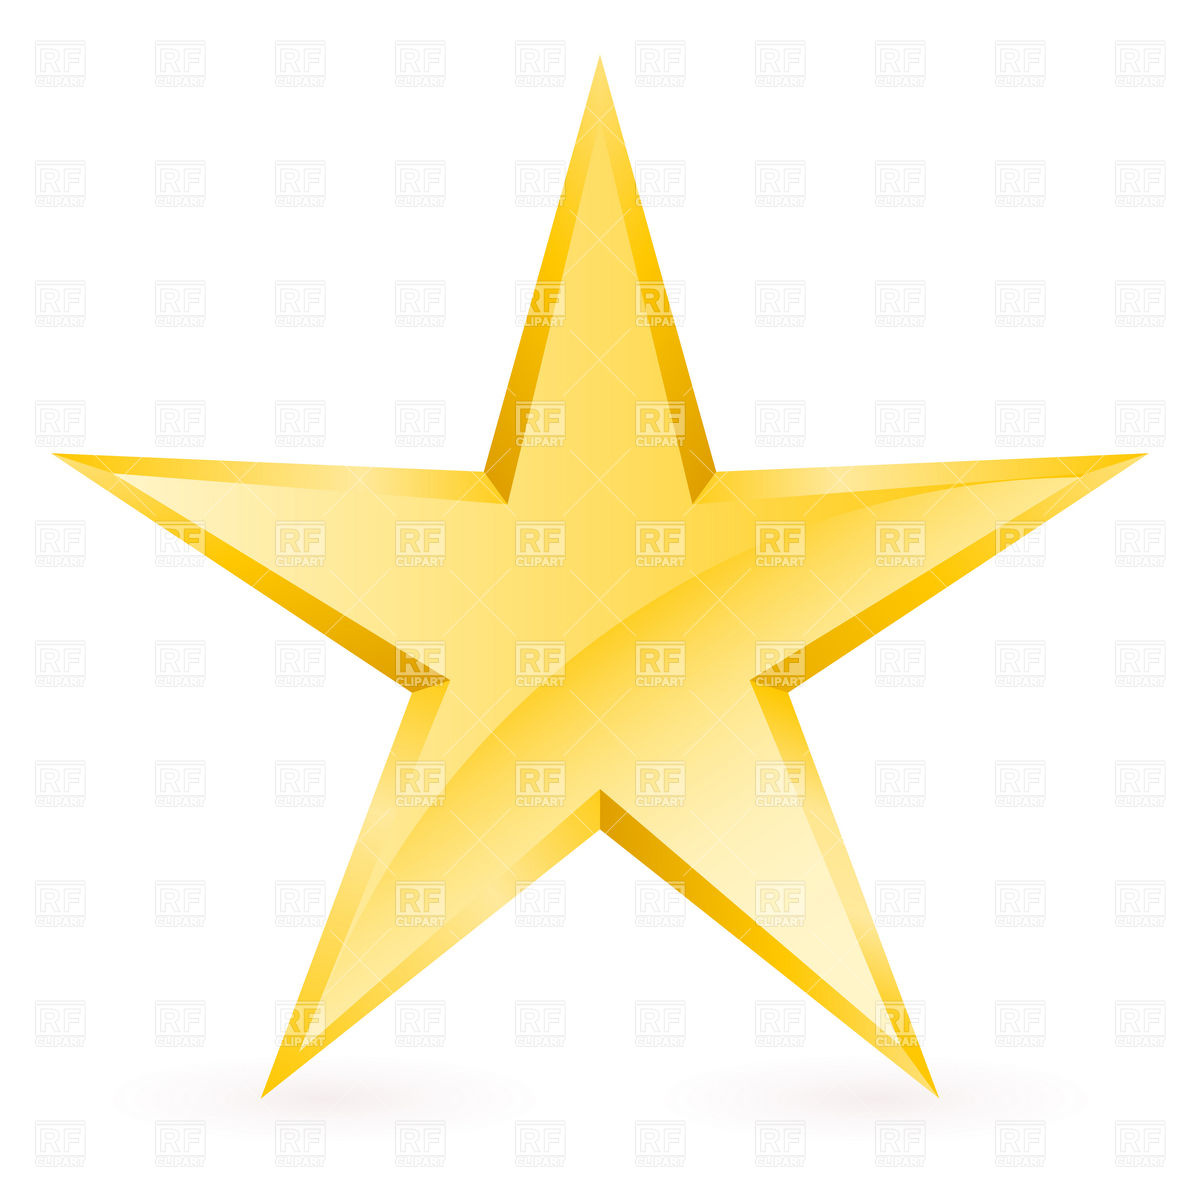 Simple Gold Star 8279 Download Royalty Free Vector Clipart  Eps